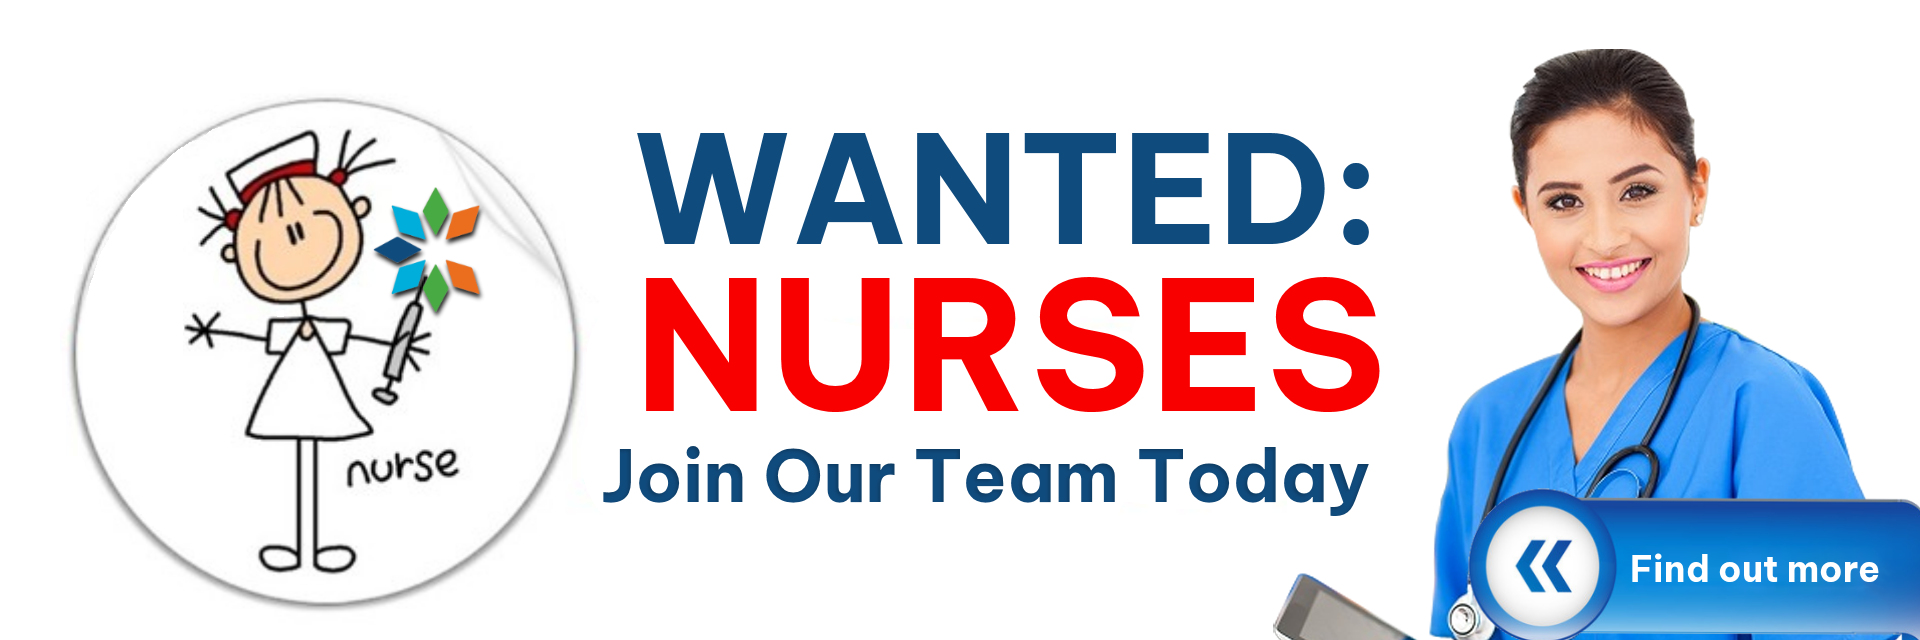 Banner picture of a circle that has a stick figure of a female Nurse smiling and then a separate picture of a female Nurse. She is holding a tablet and wearing a stethoscope around her neck. Banner says:

Working together to make lives better
Join Our Team Today